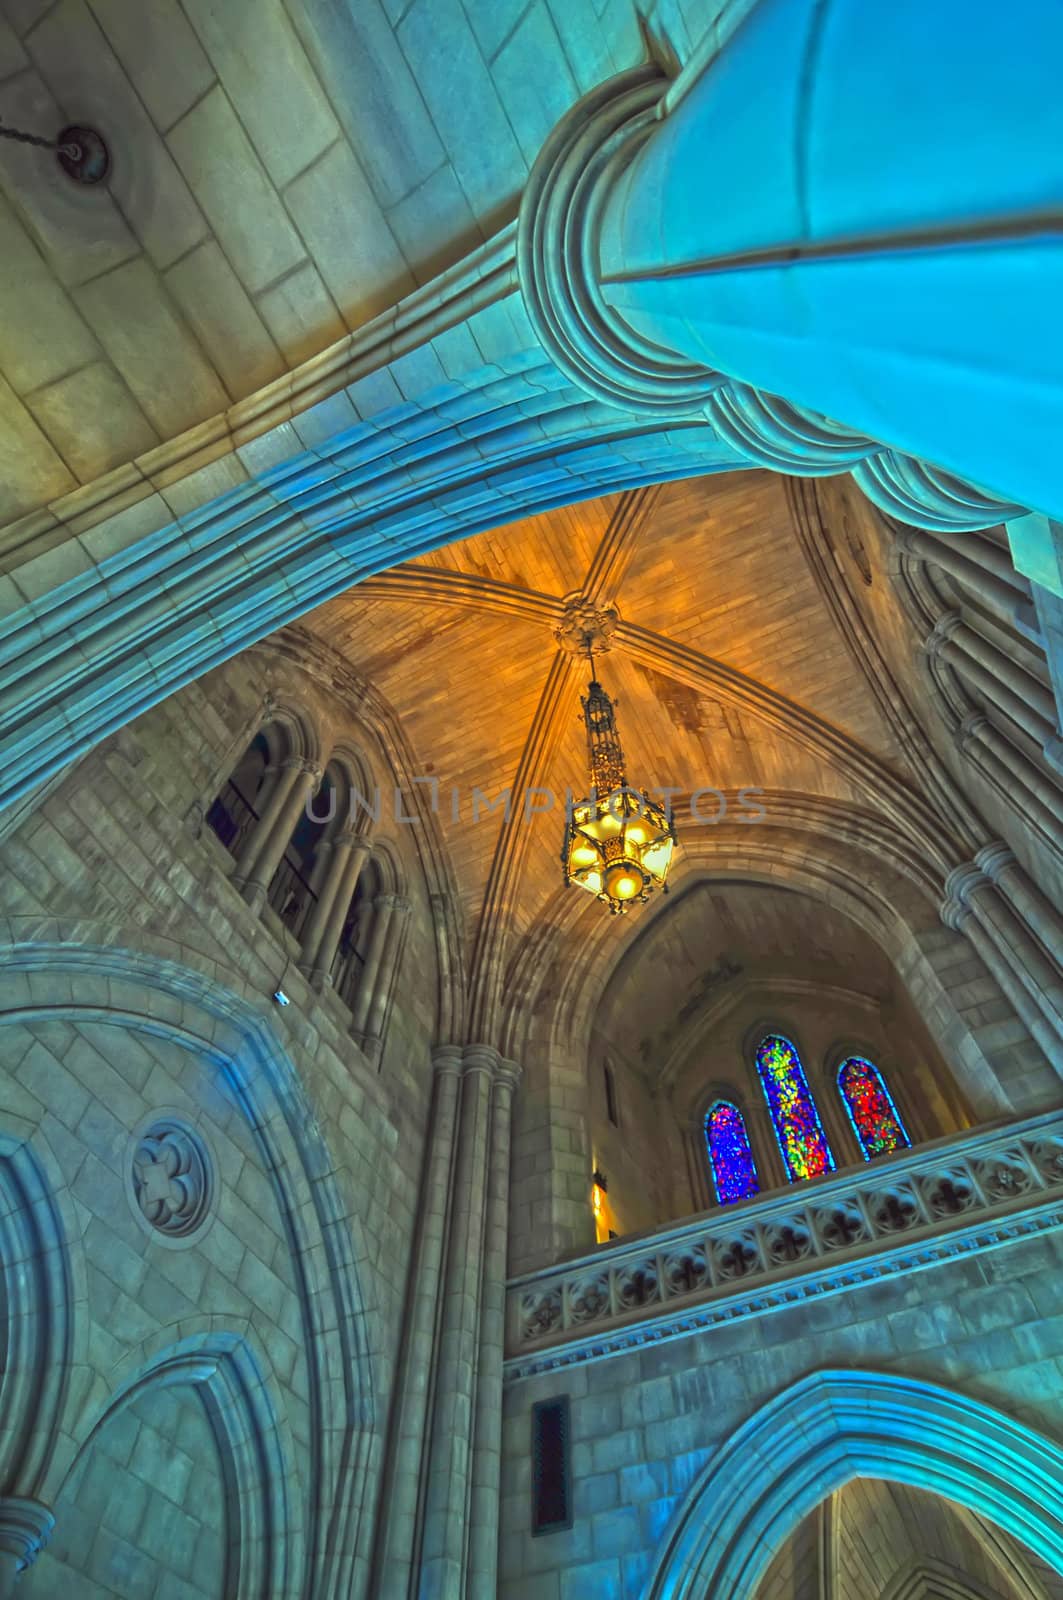 interior of a national cathedral gothic classic architecture